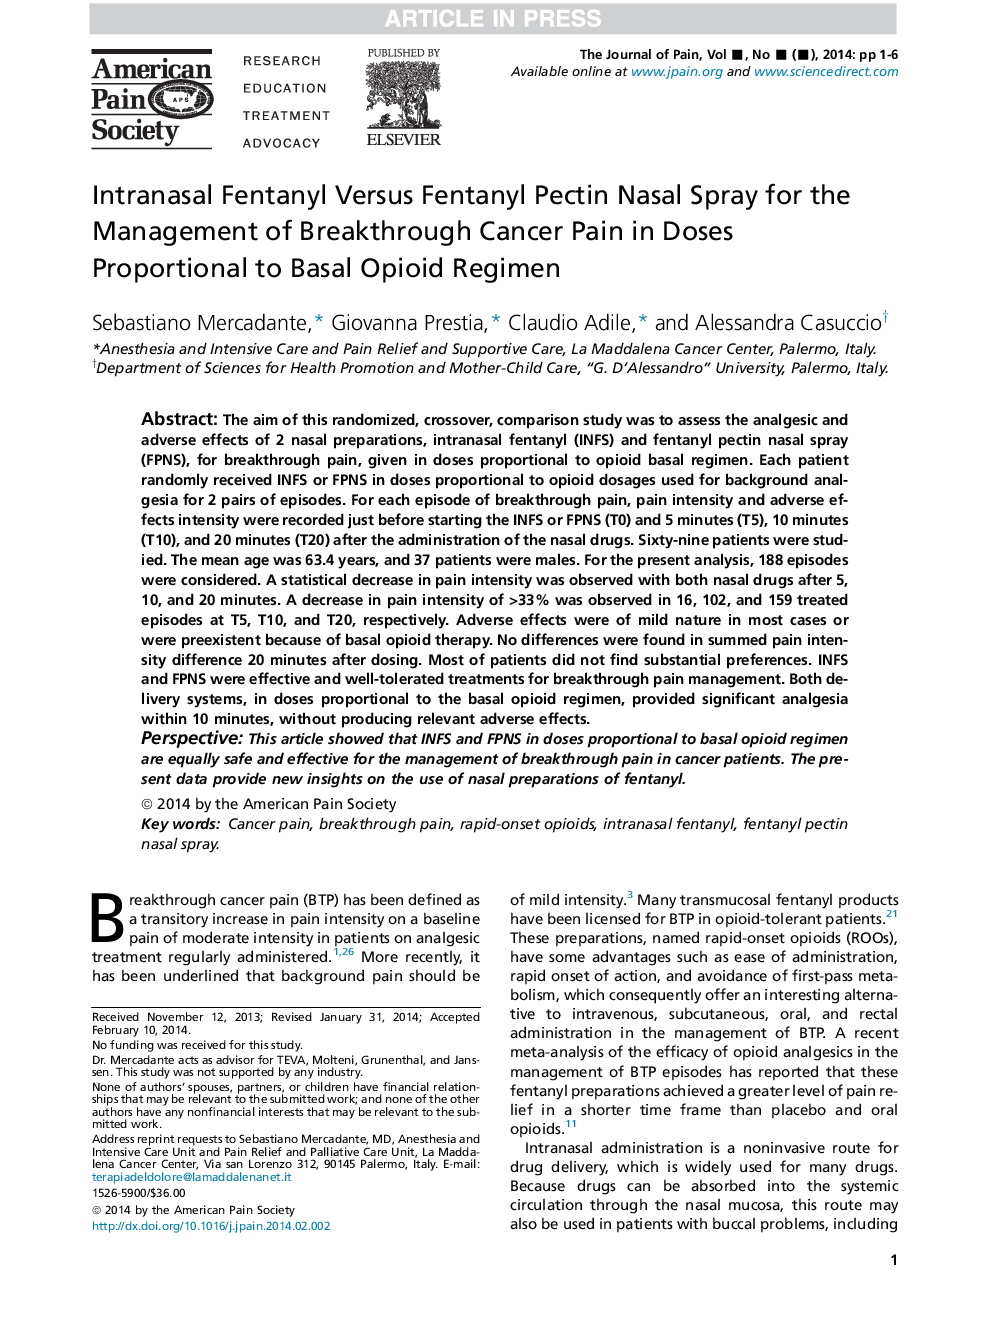 Intranasal Fentanyl Versus Fentanyl Pectin Nasal Spray for the Management of Breakthrough Cancer Pain in Doses Proportional to Basal Opioid Regimen